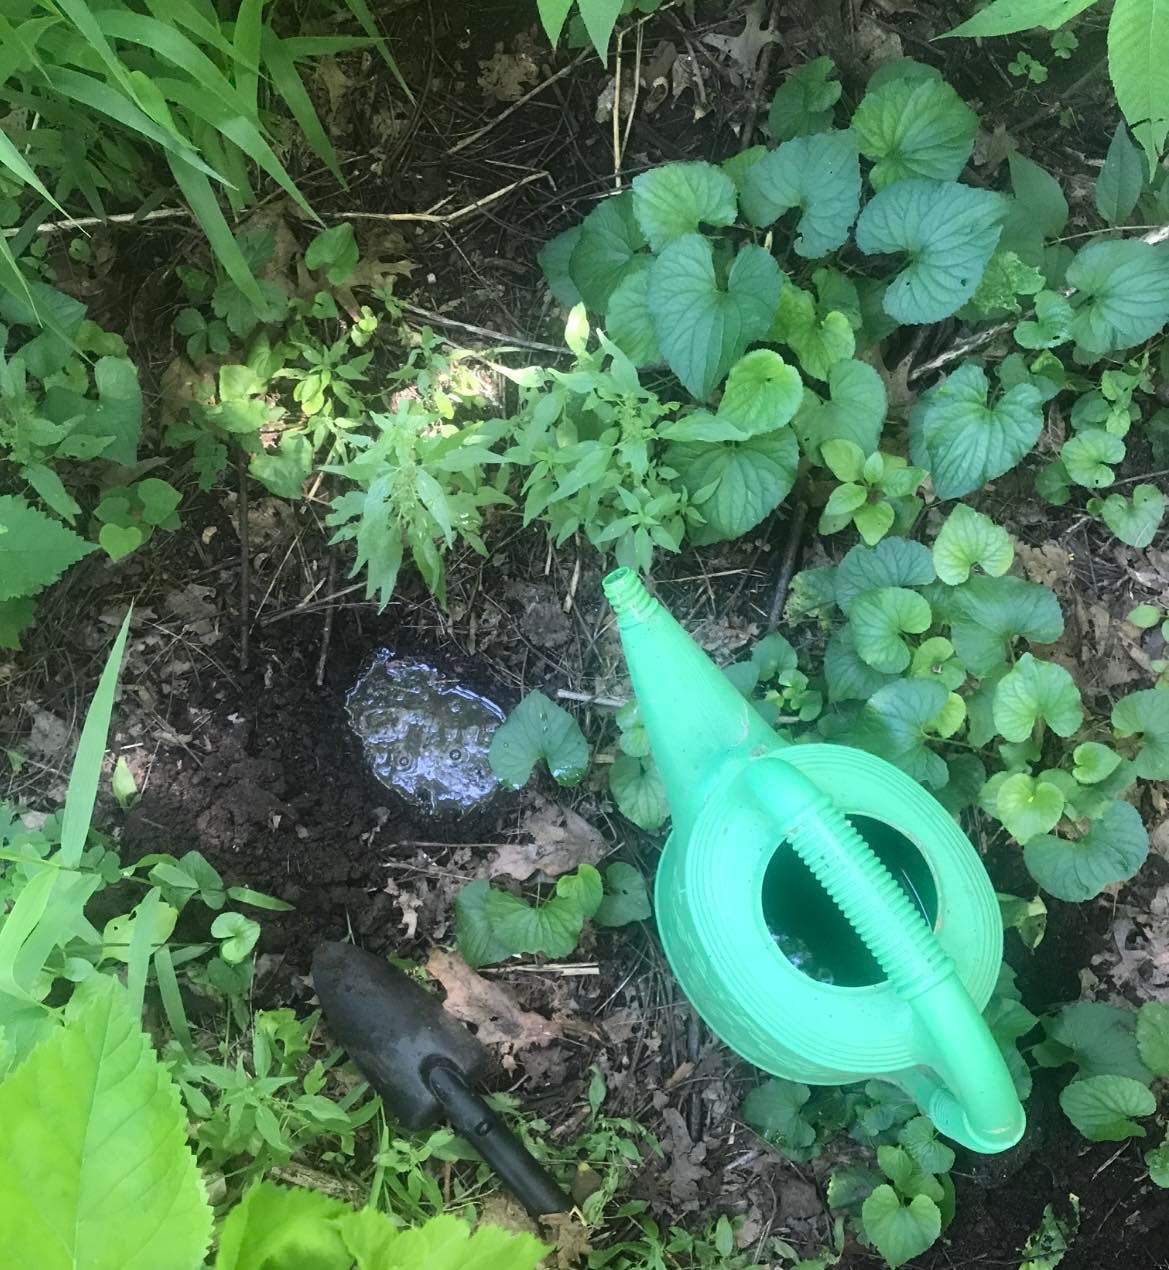 A bright green watering can and a small black trowel sit next to a freshly dug hole filled with water, surrounded by small herbaceous plants.